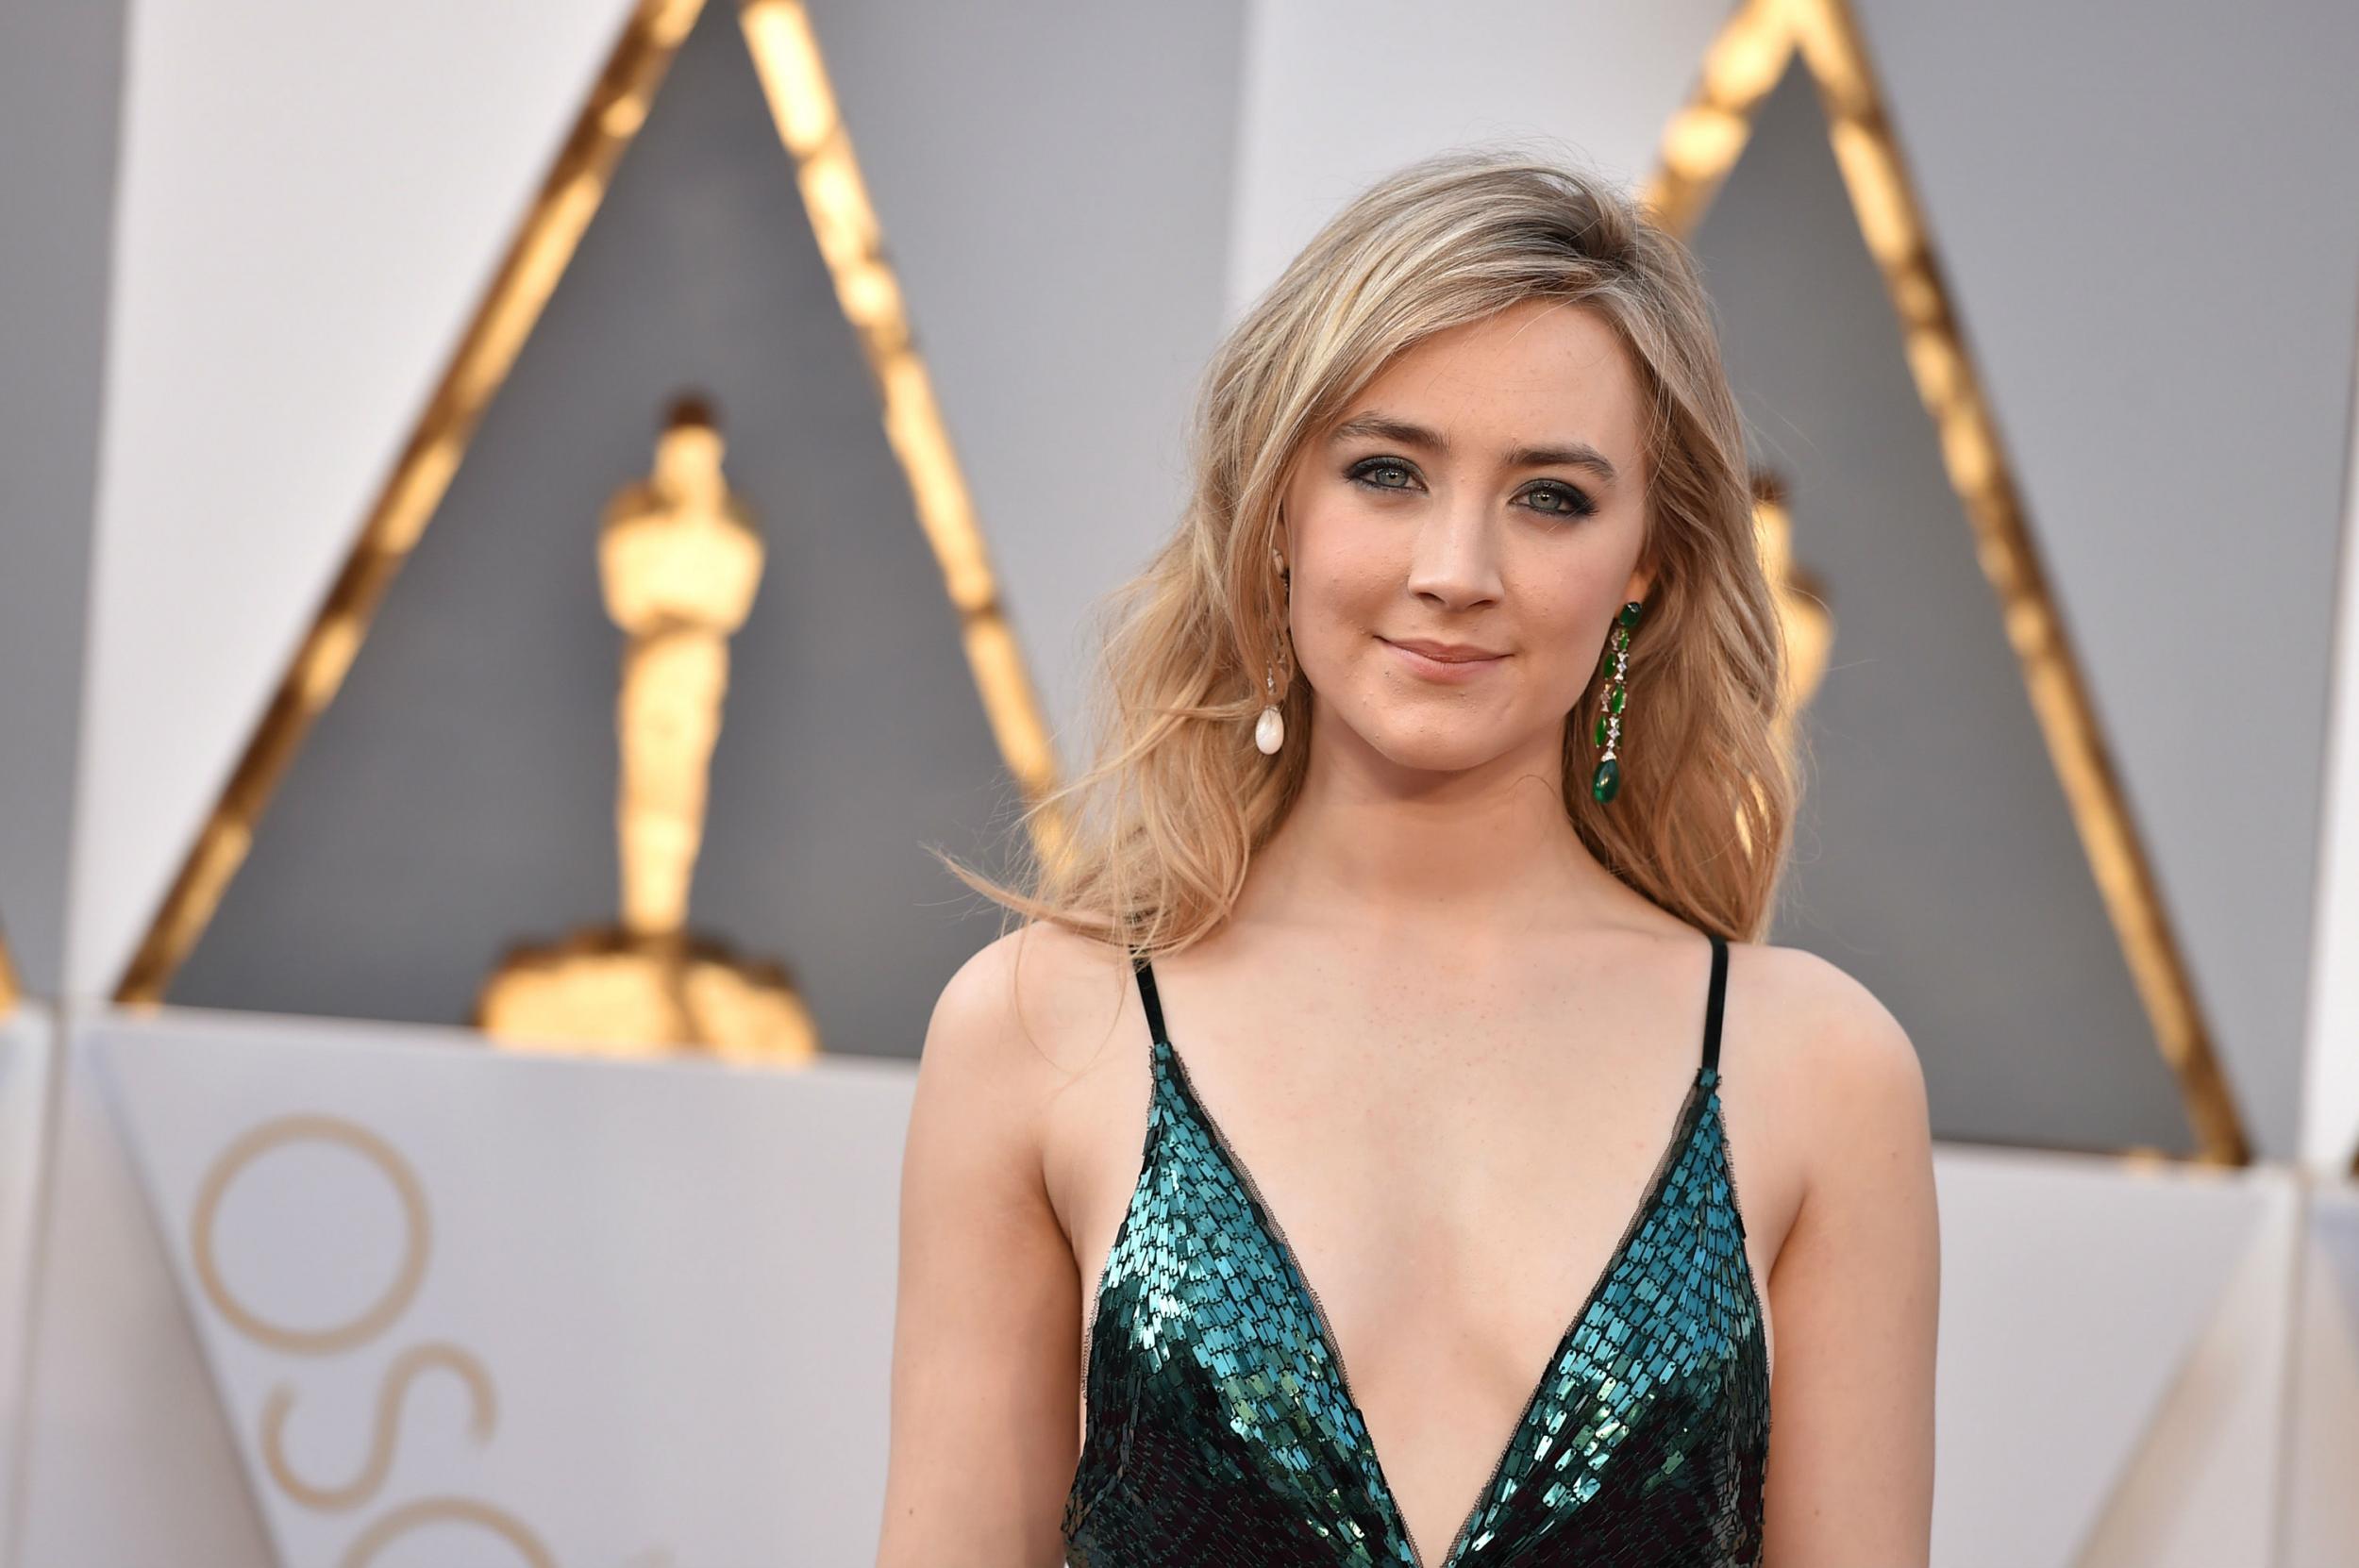 Saoirse Ronan wore a green dress by Calvin Klein to represent her home country, Ireland